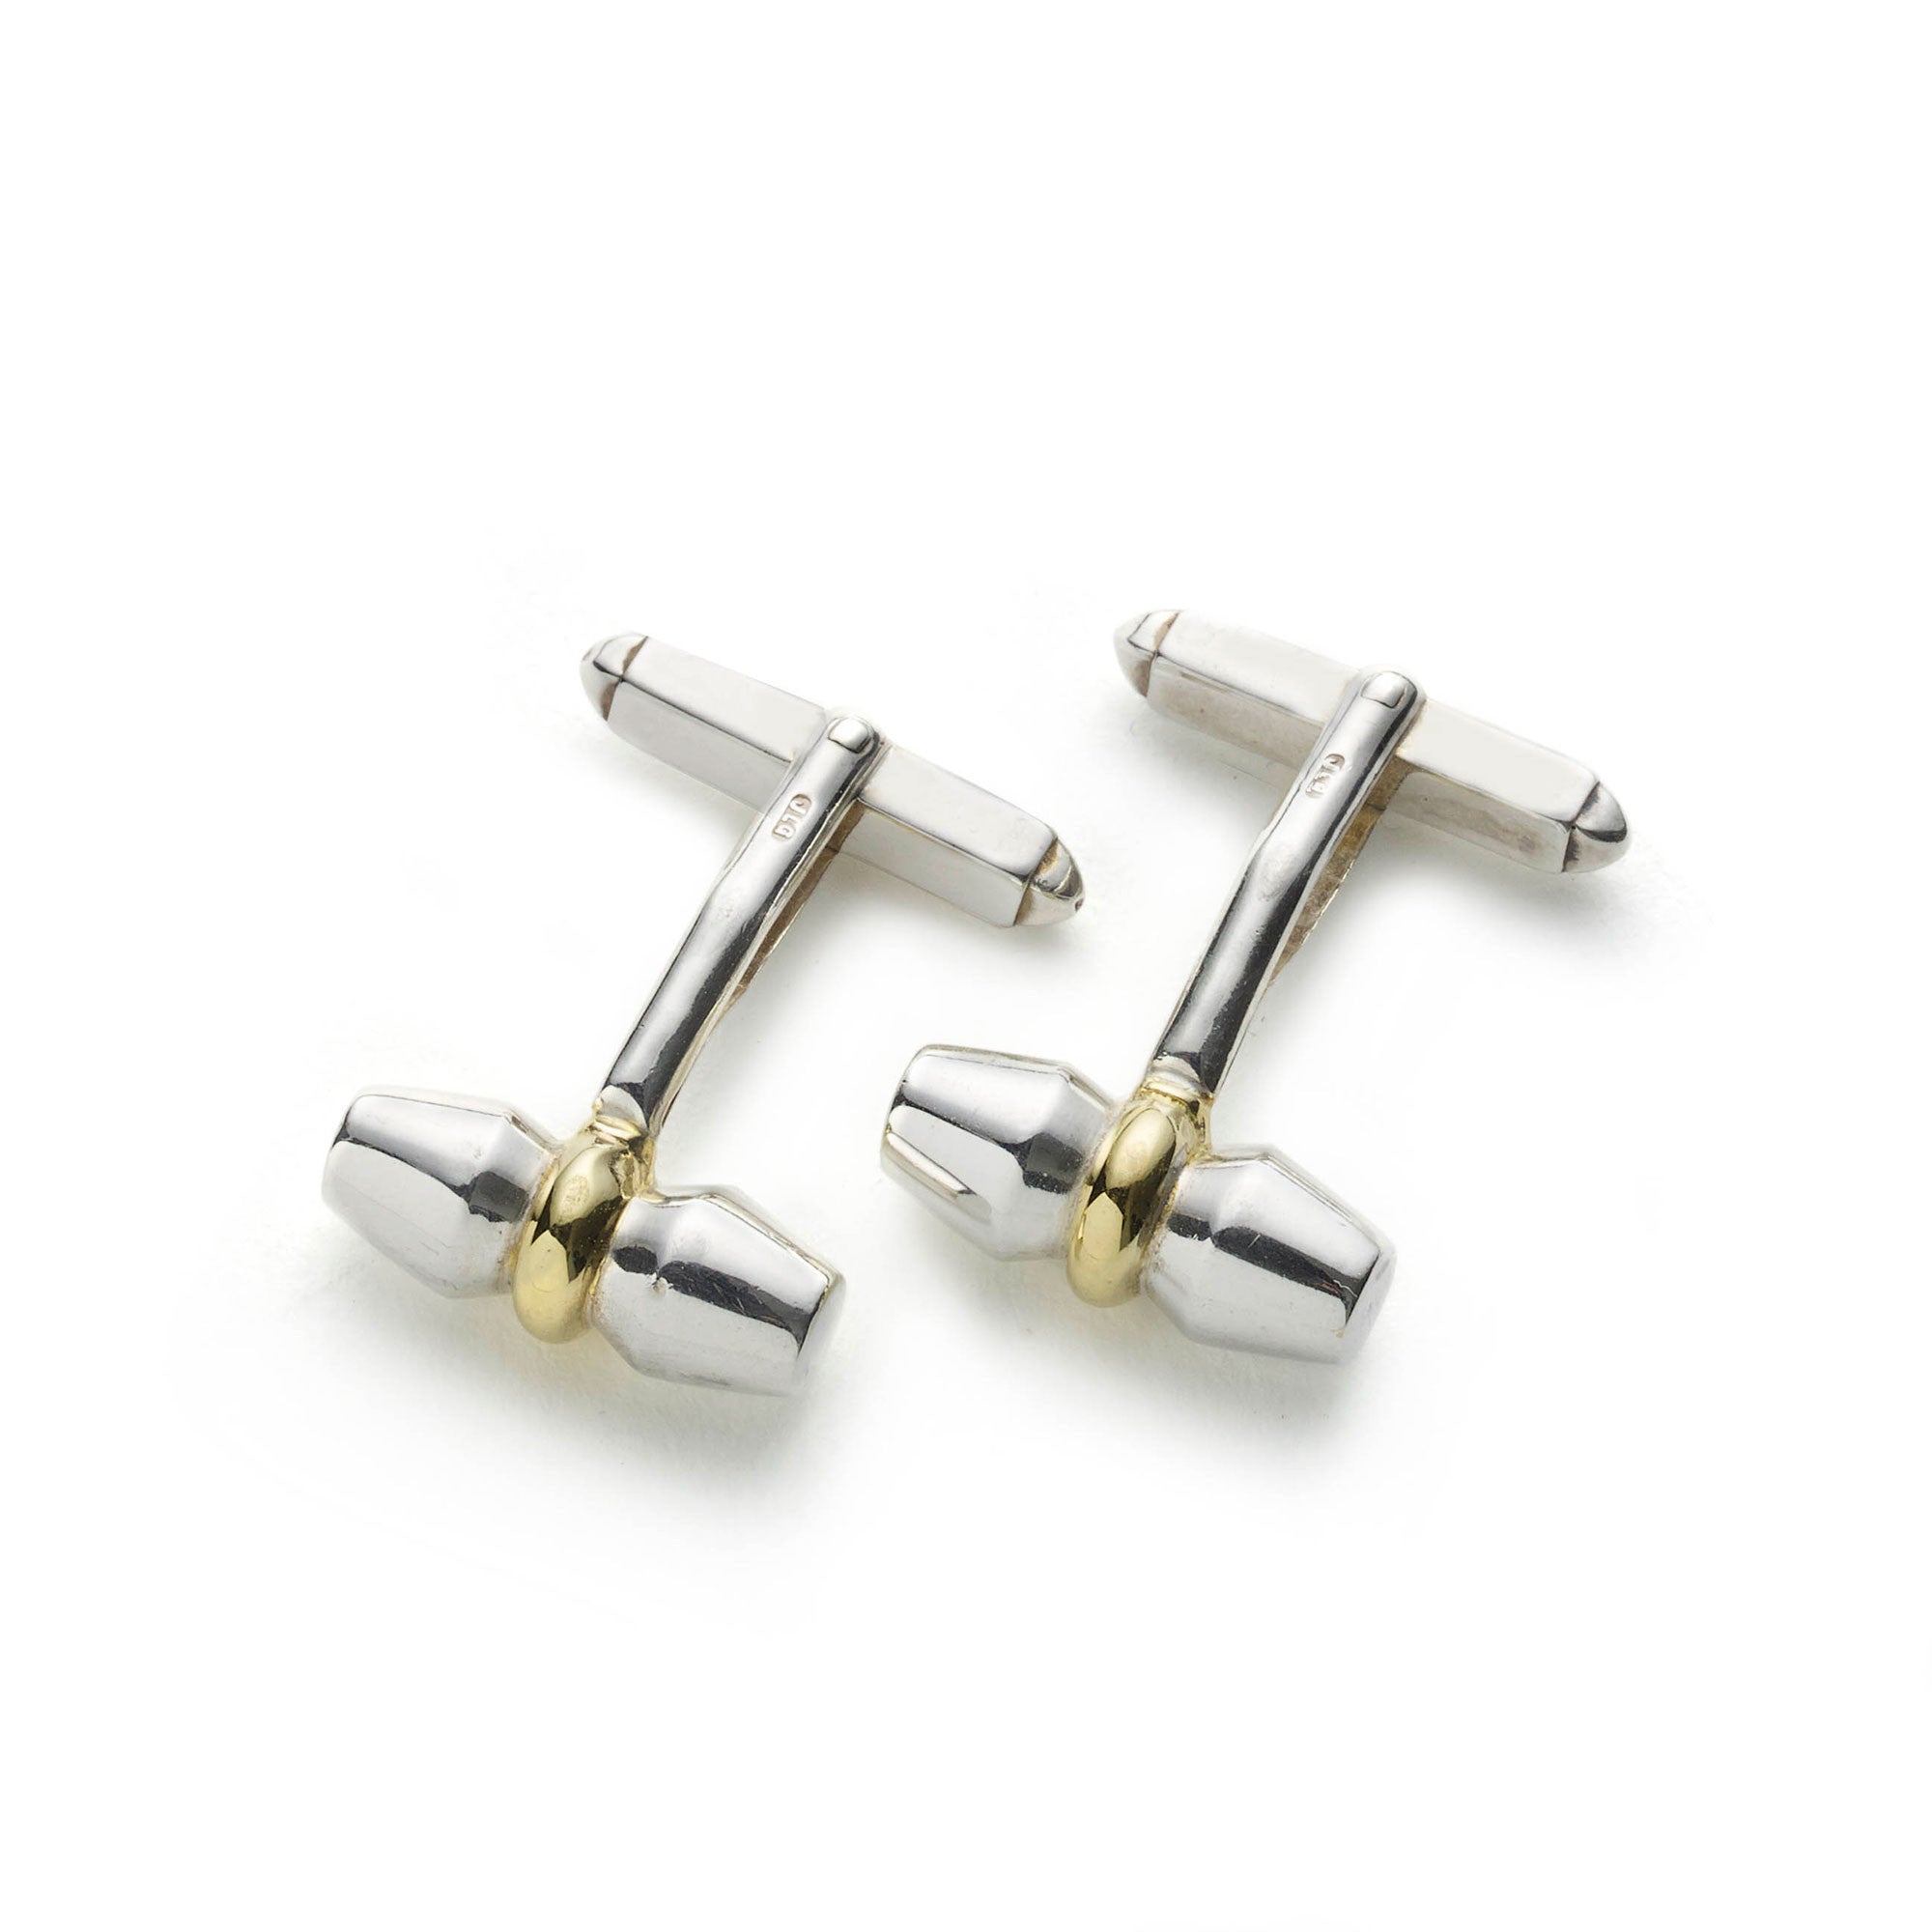 Silver and yellow gold toggle cufflinks on white background